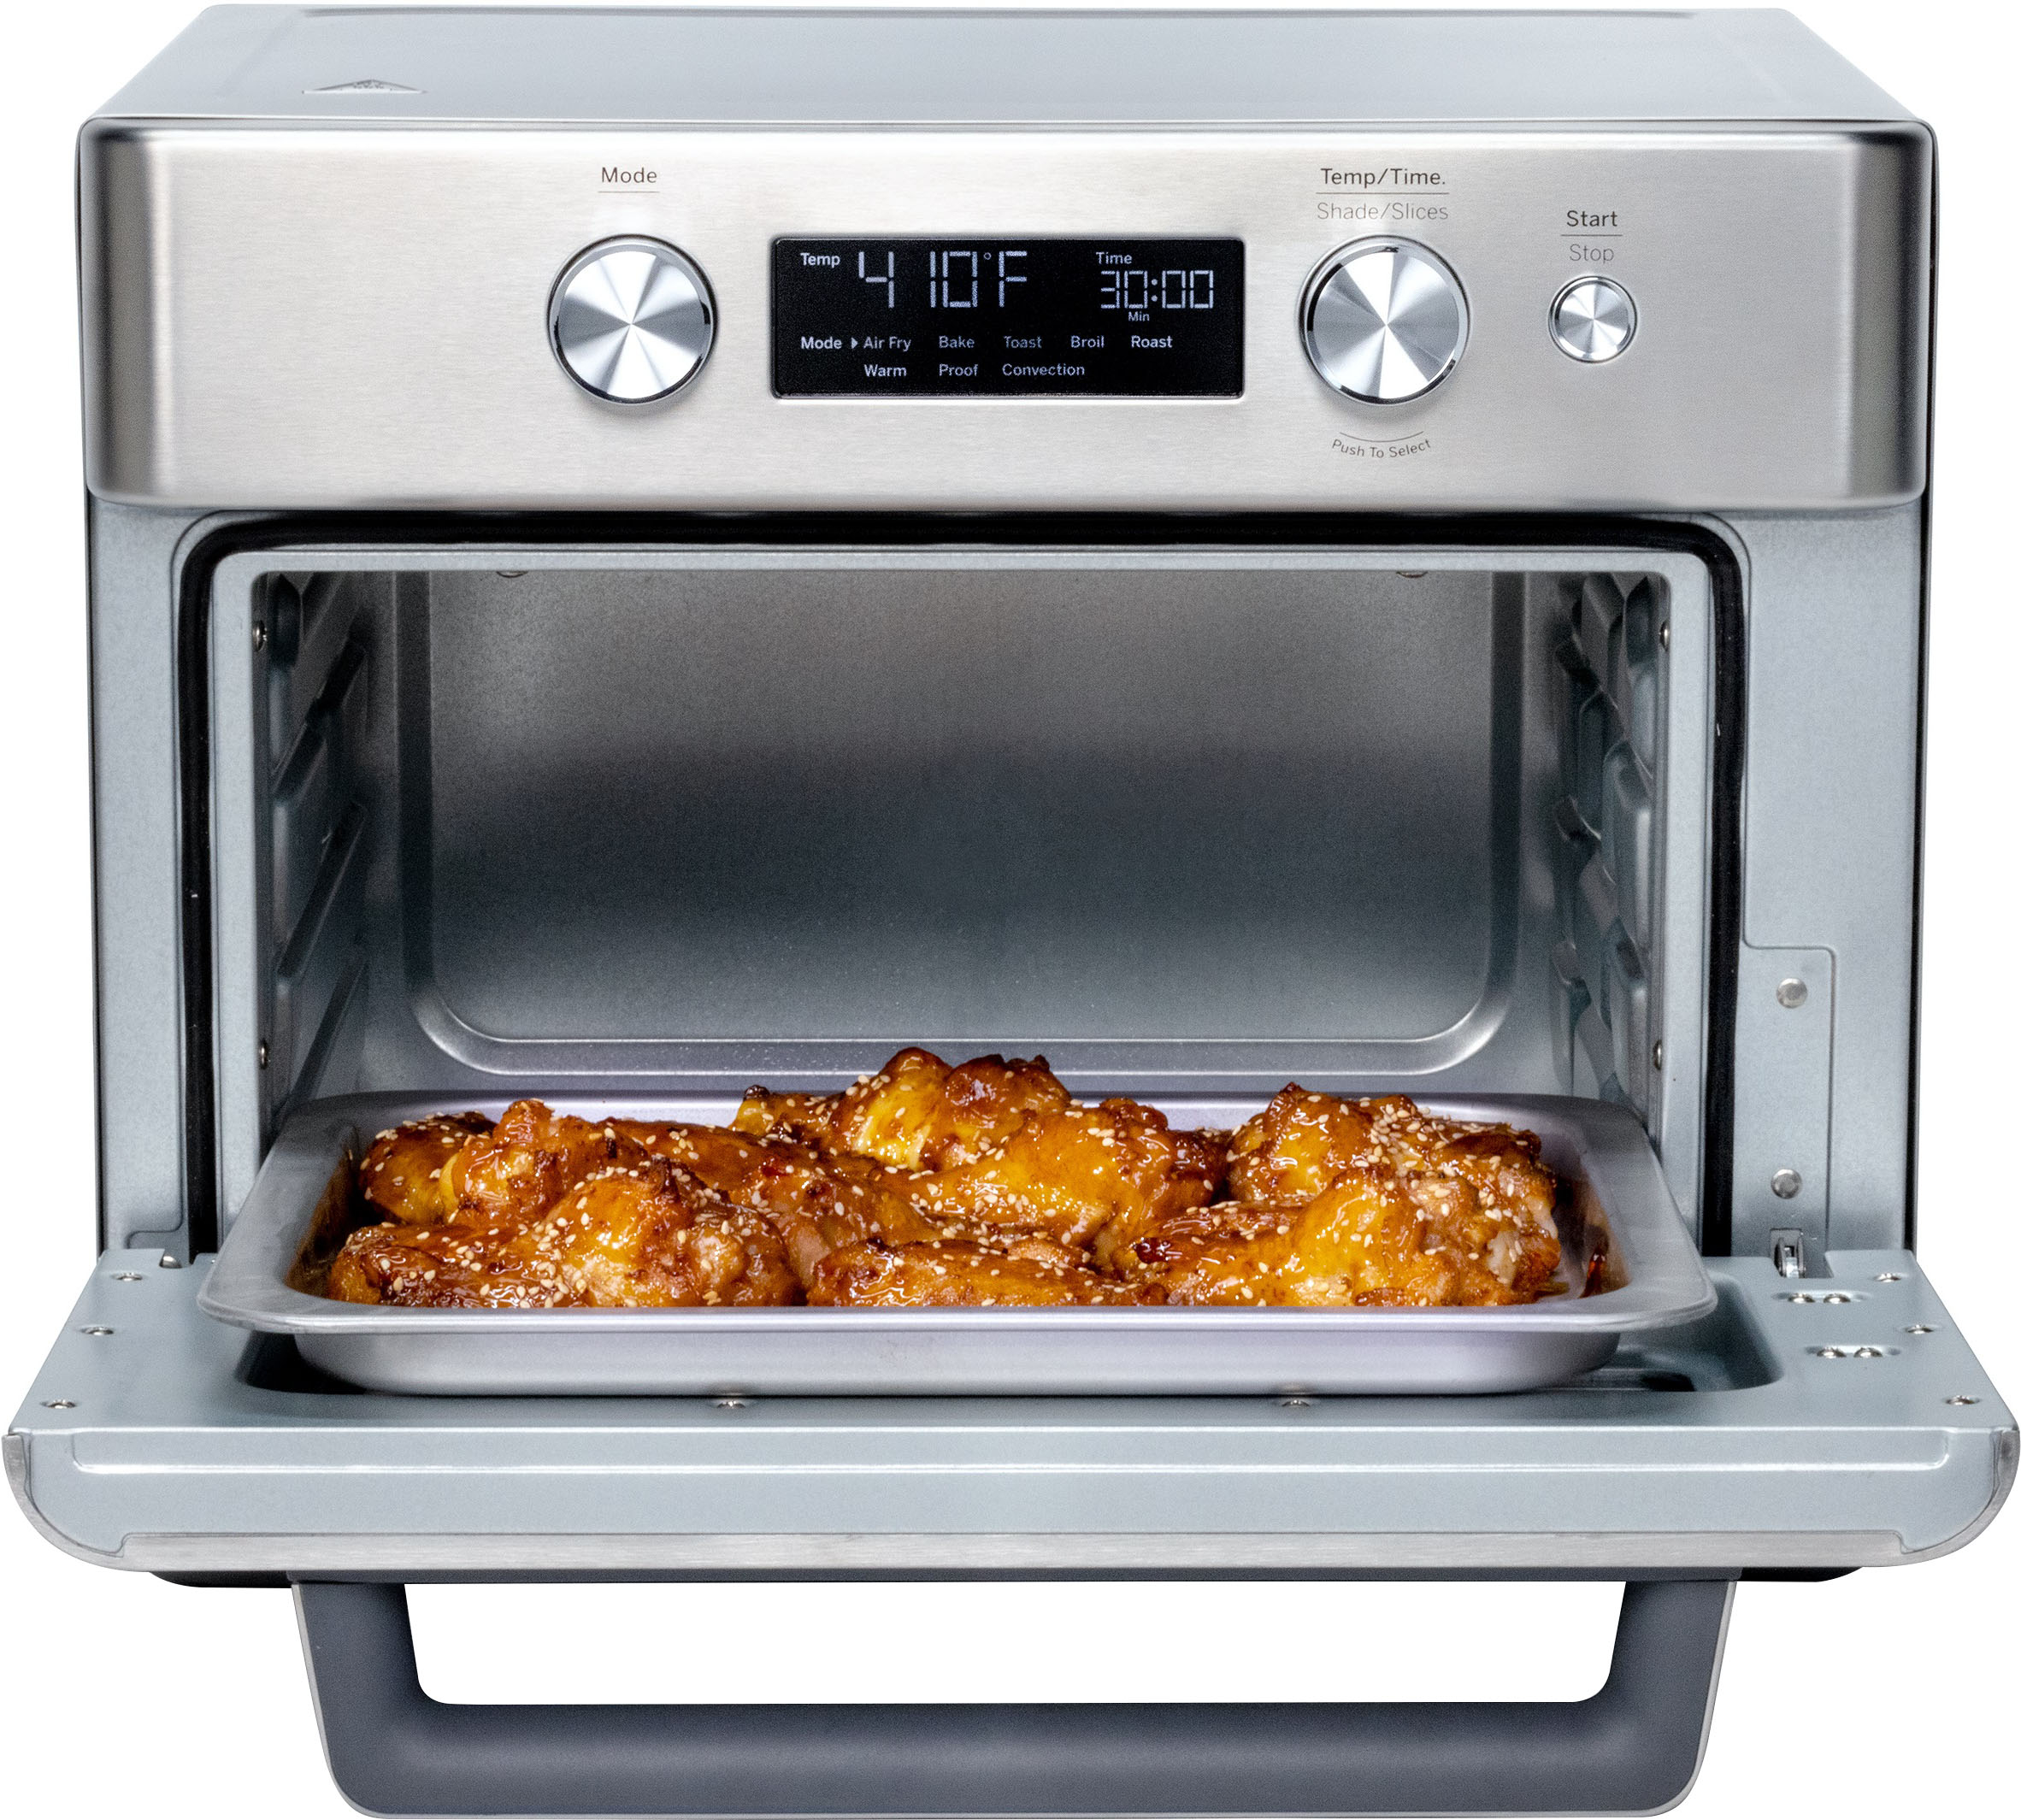 G9OAABSSPSS by GE Appliances - GE Mechanical Air Fry 7-in-1